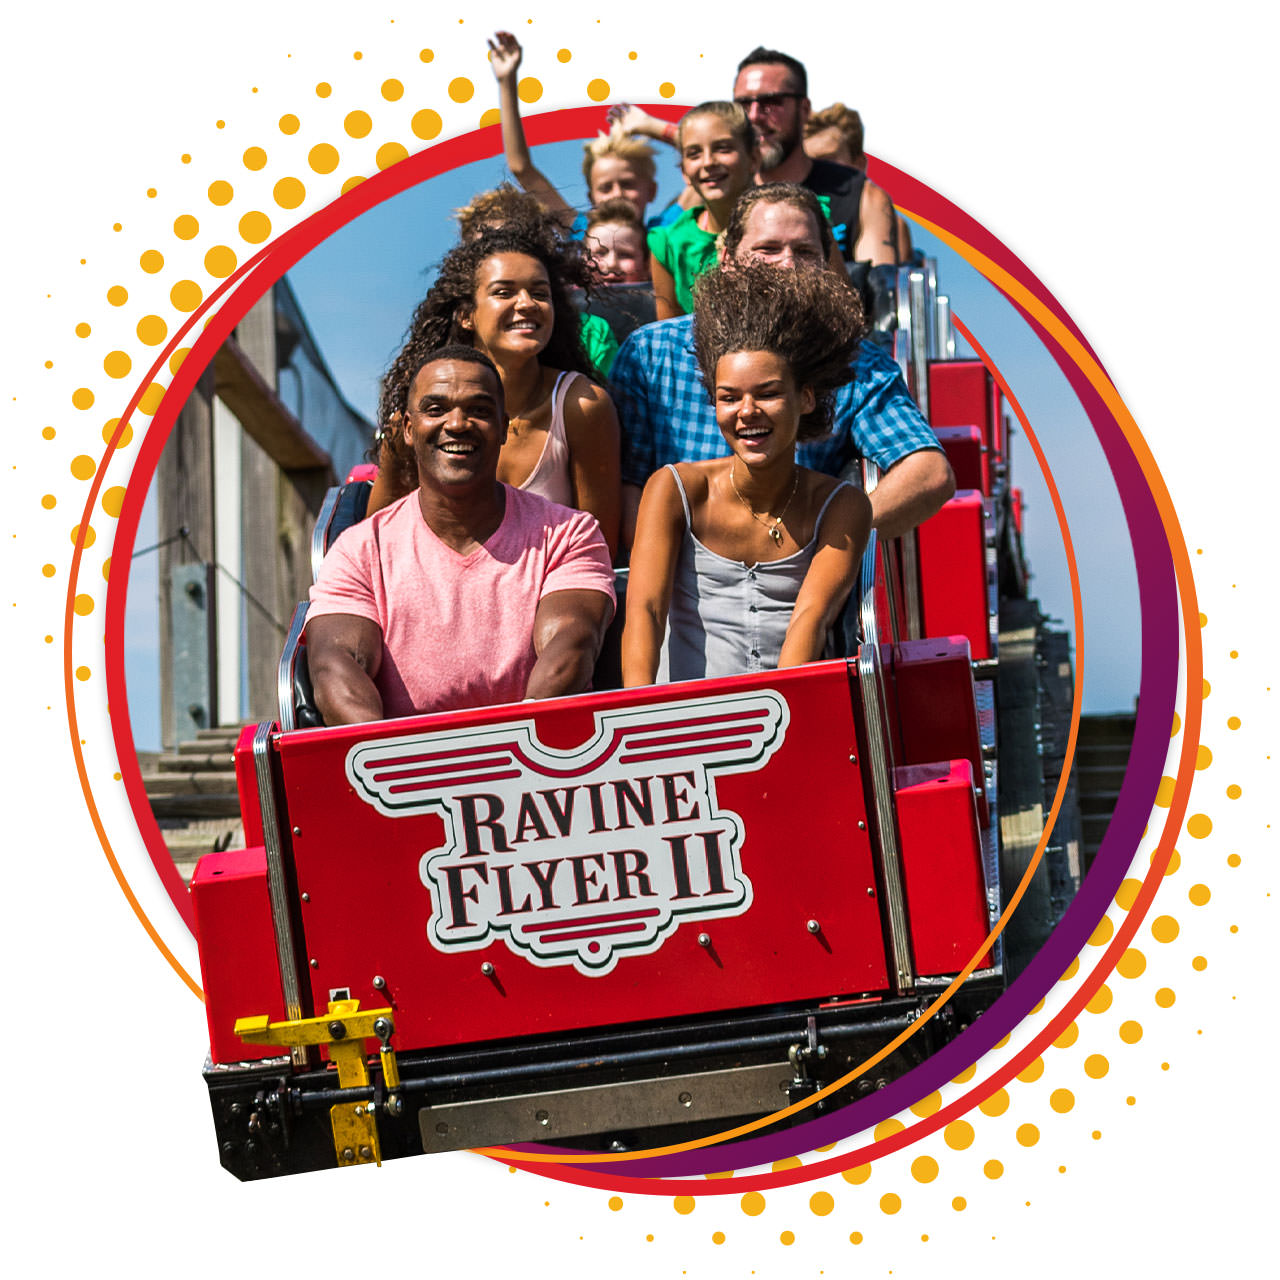 Guests riding the Ravine Flyer II